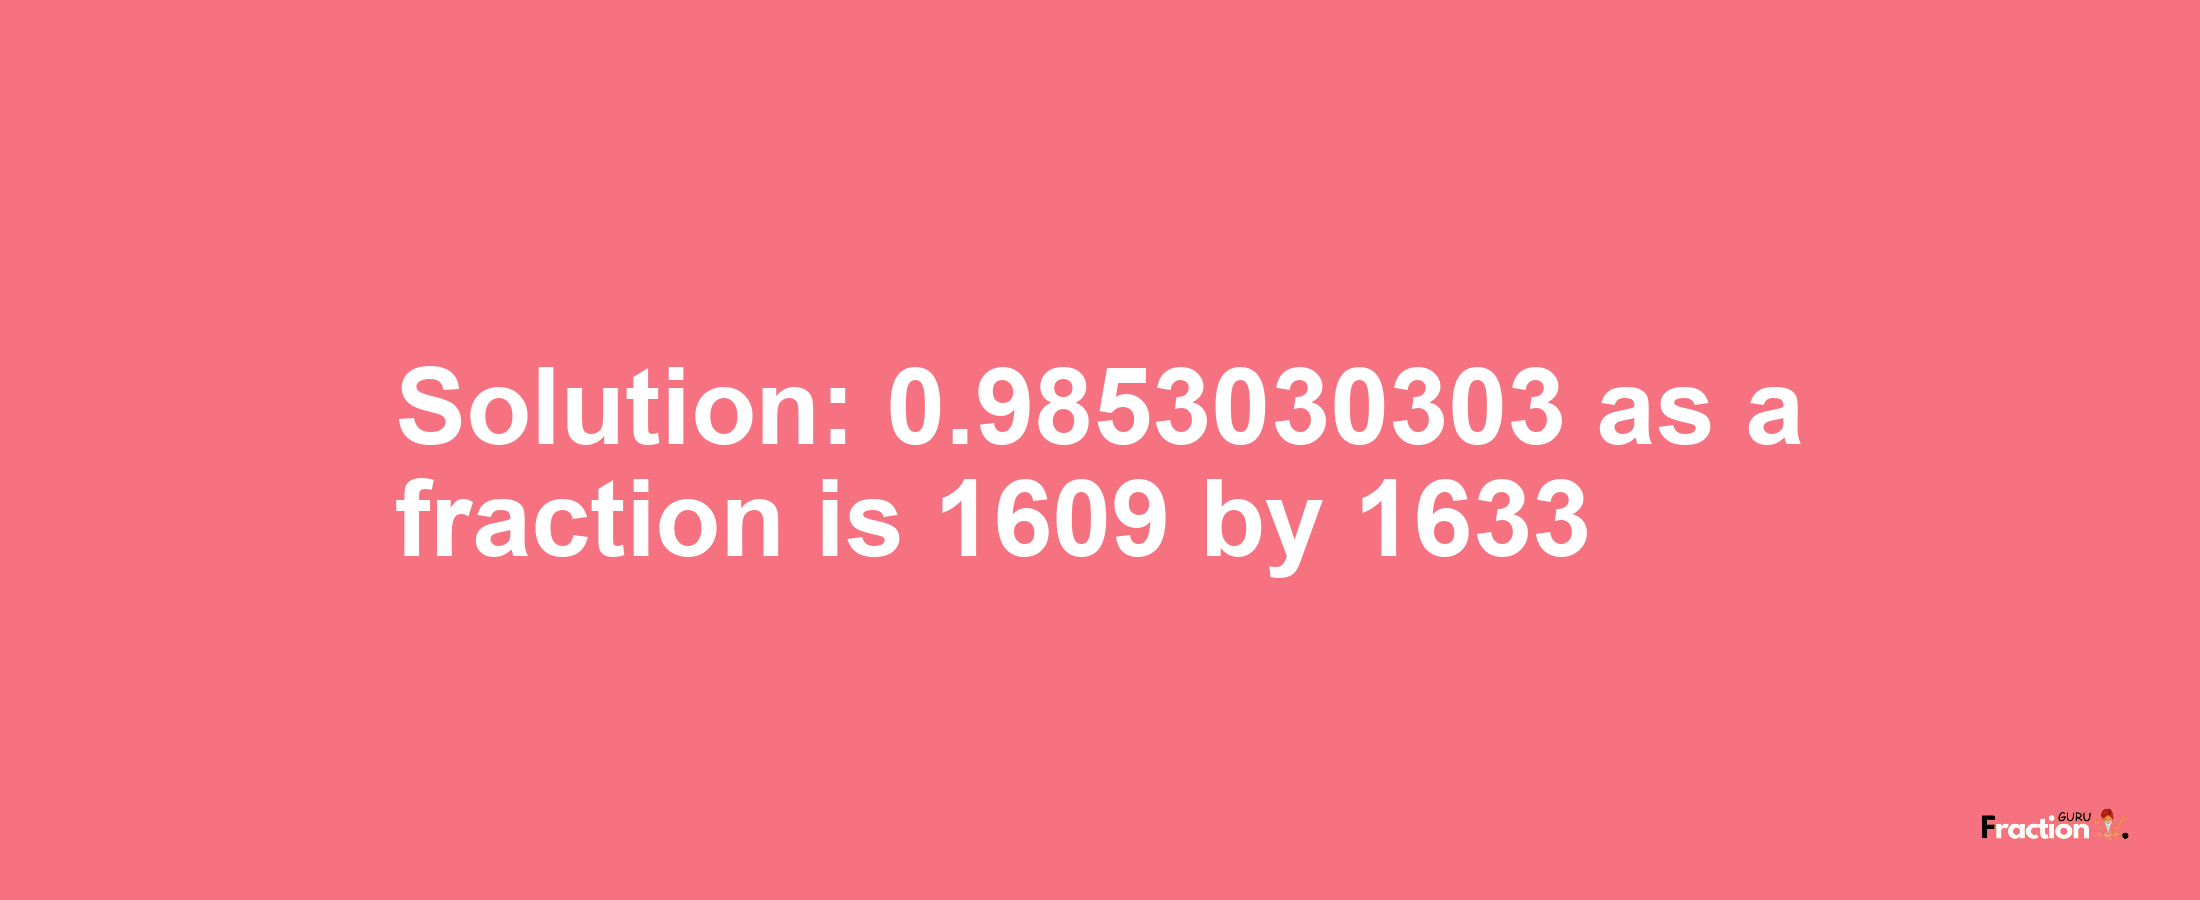 Solution:0.9853030303 as a fraction is 1609/1633